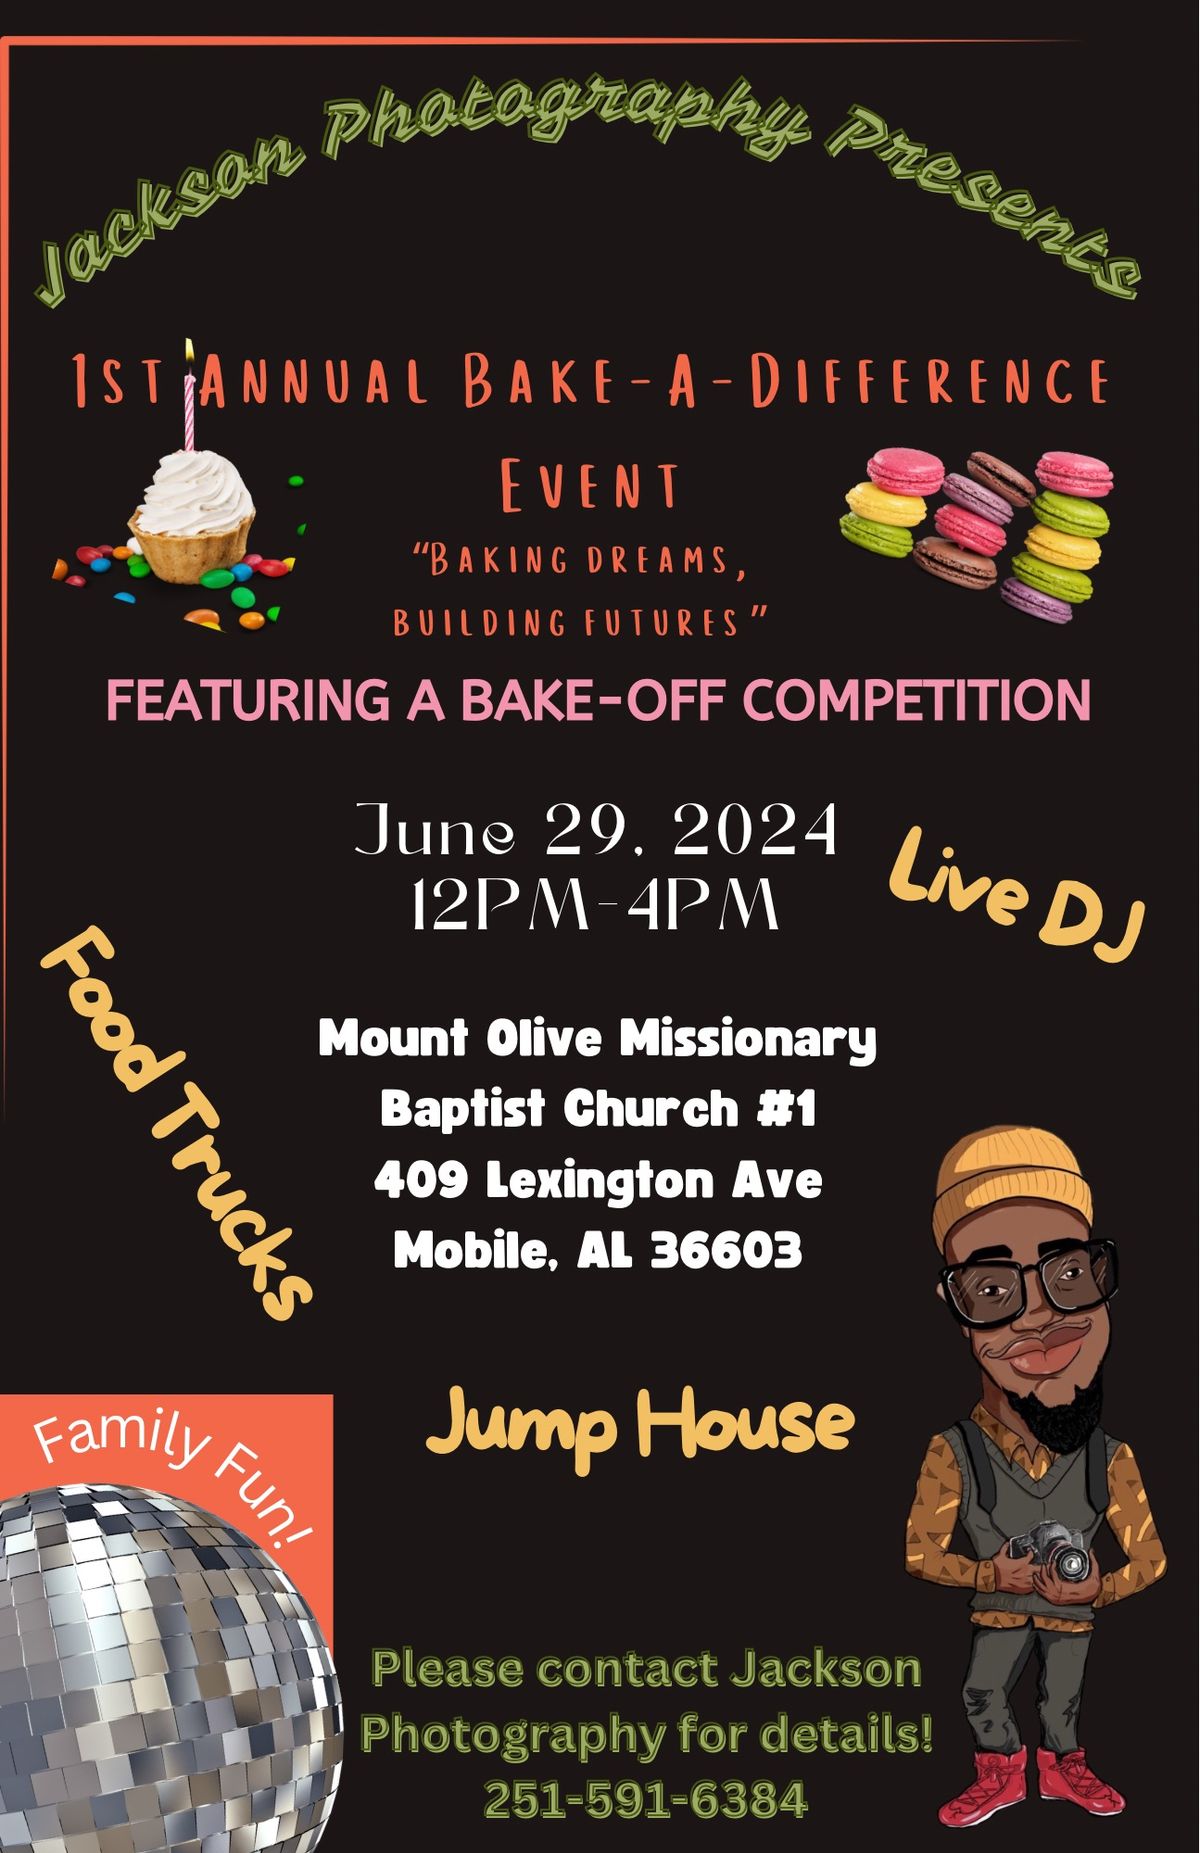 1st Annual Bake-A-Difference Event